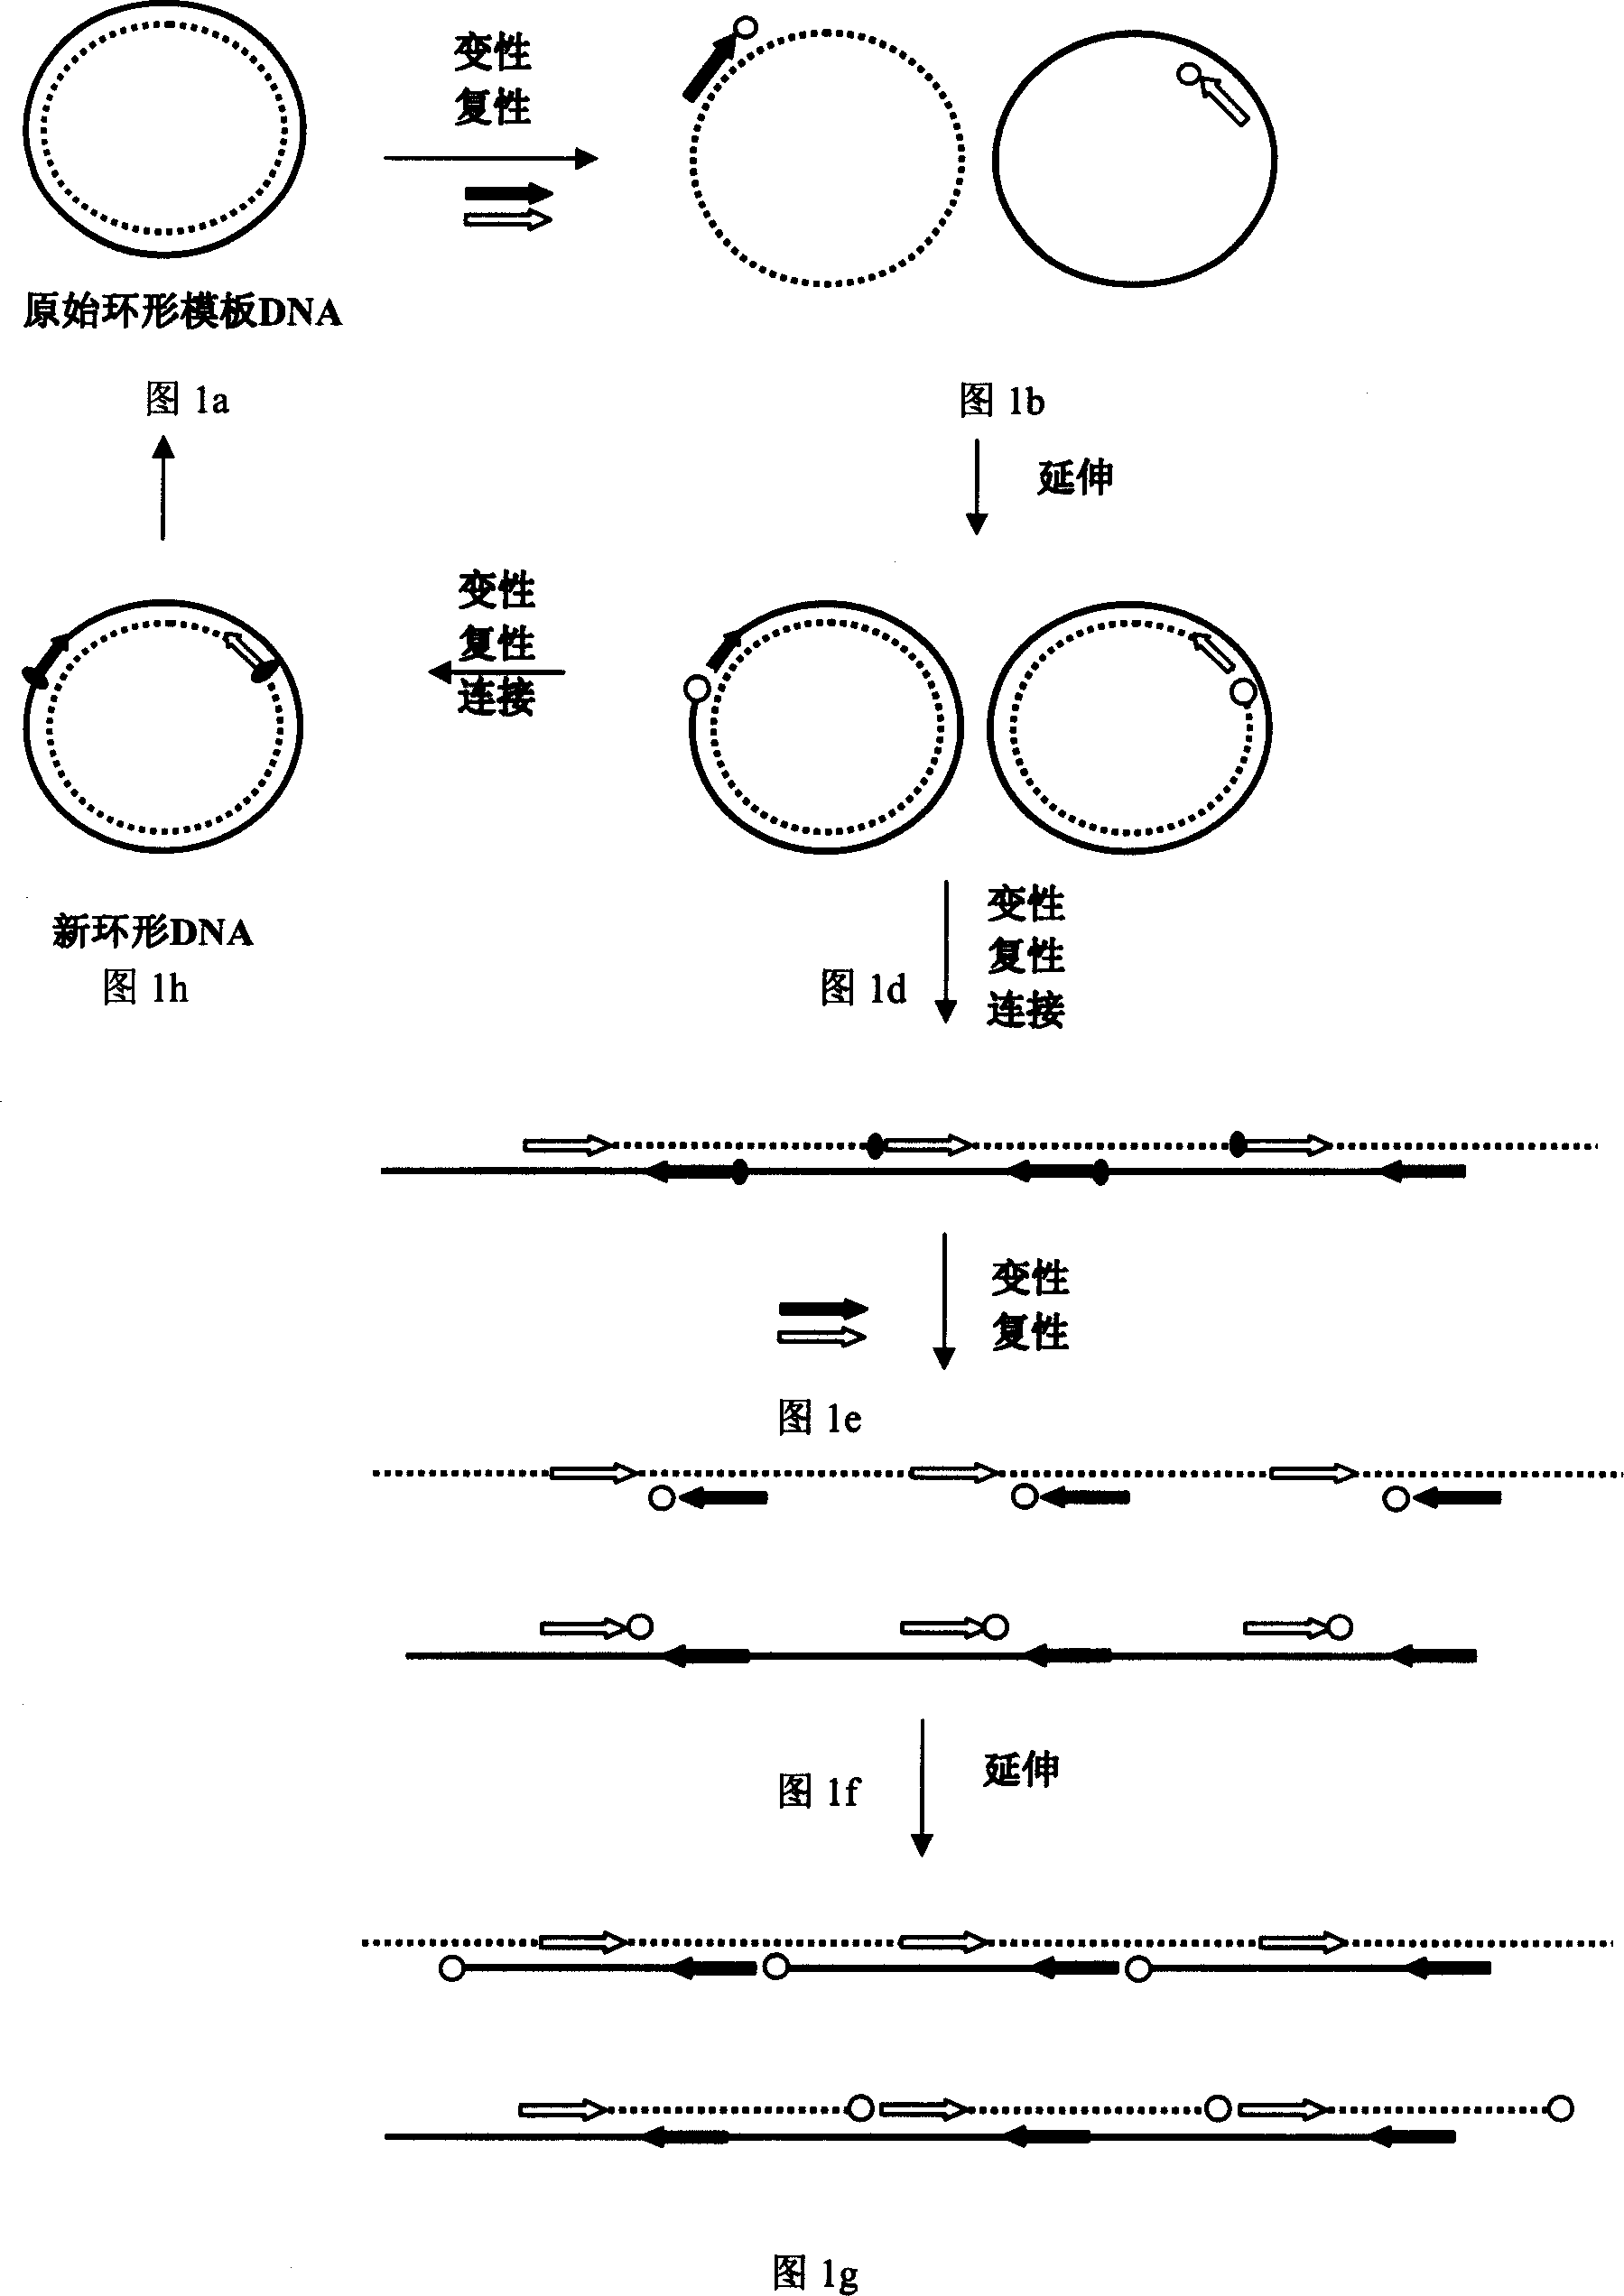 Method for externally amplifying specific ring type or concatemer nucleic acid